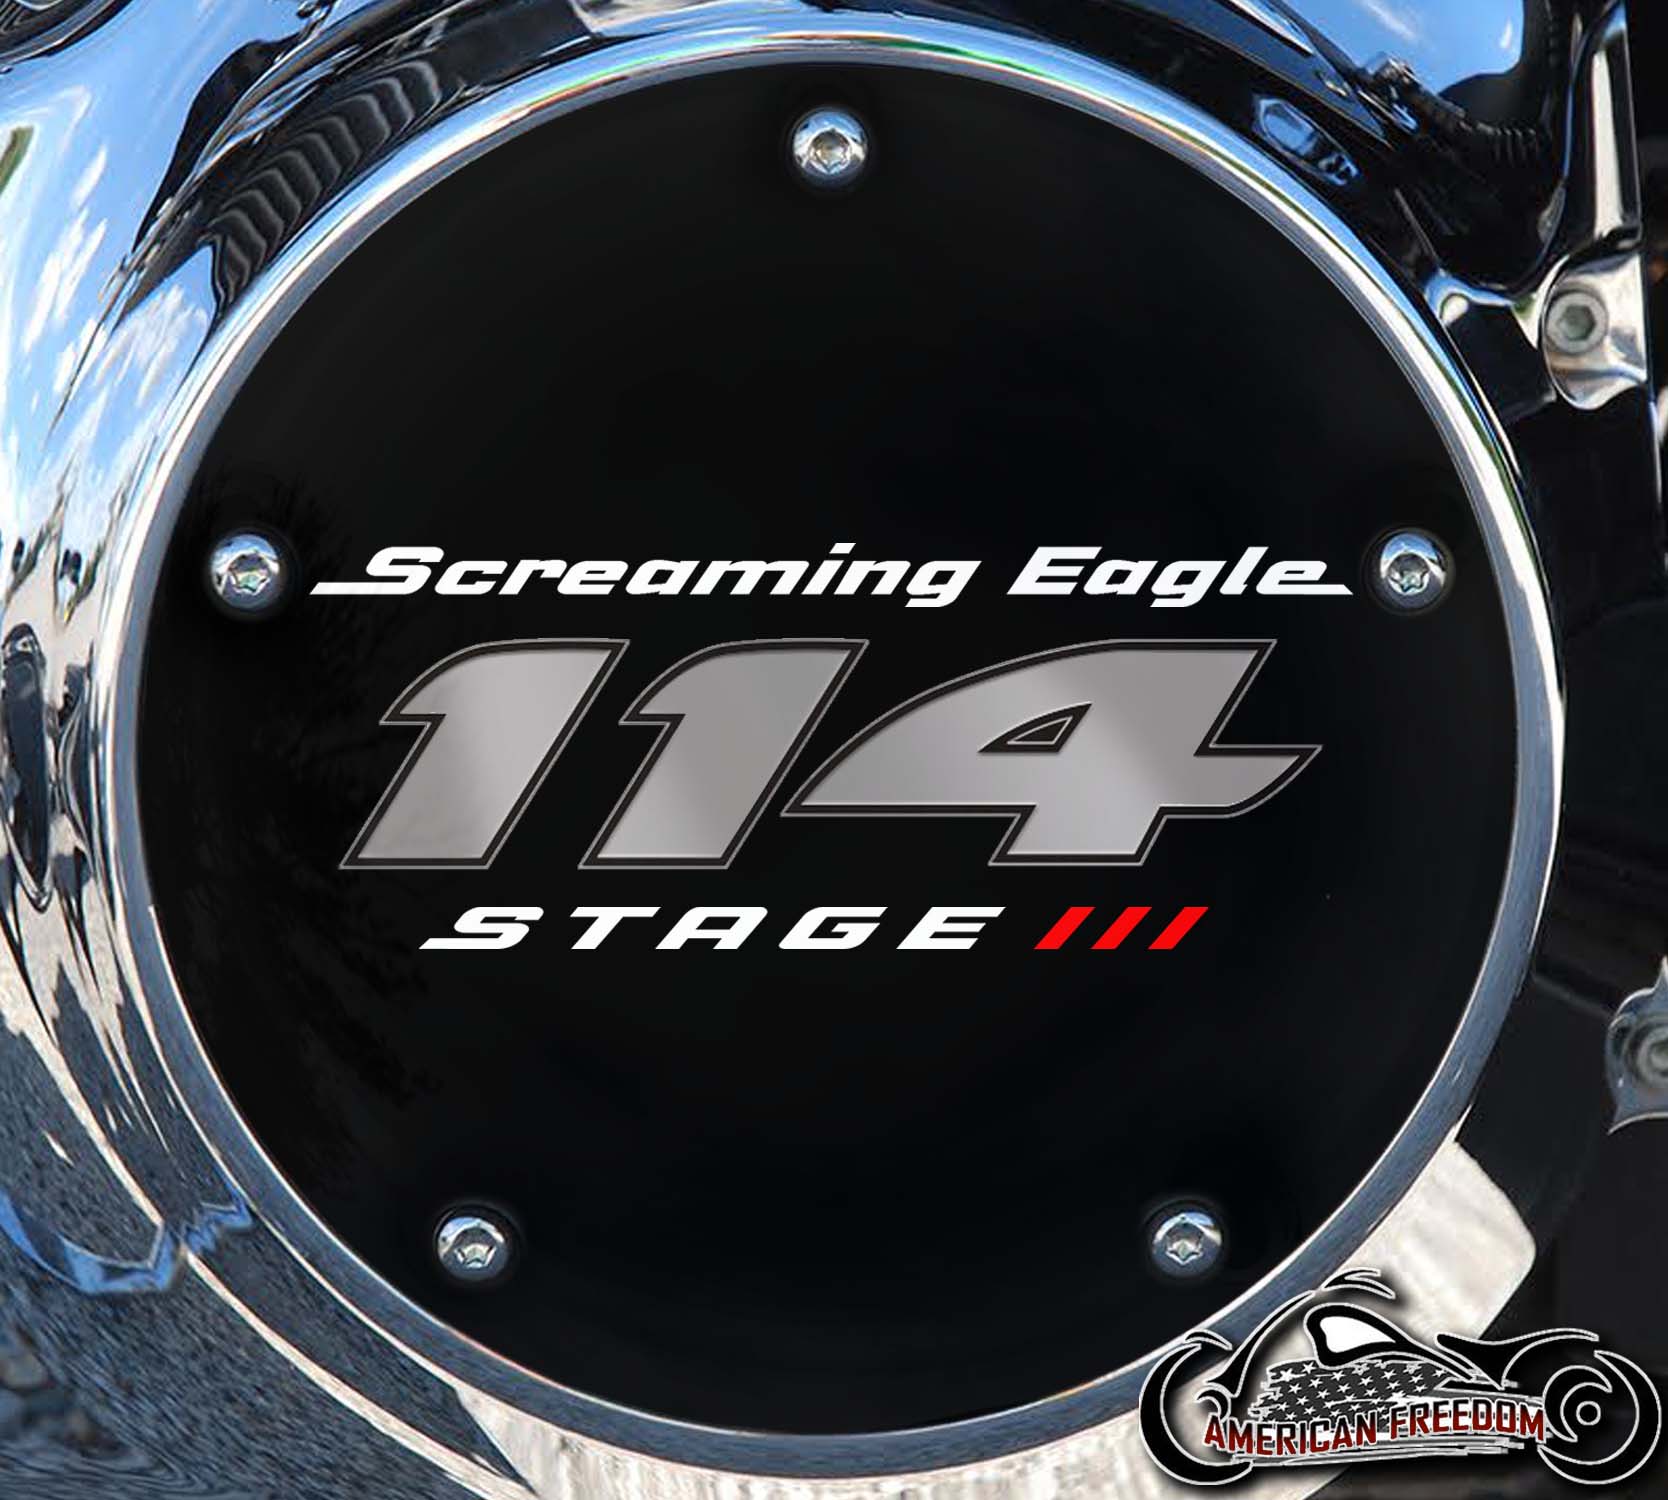 Screaming Eagle Stage III 114 DERBY COVER